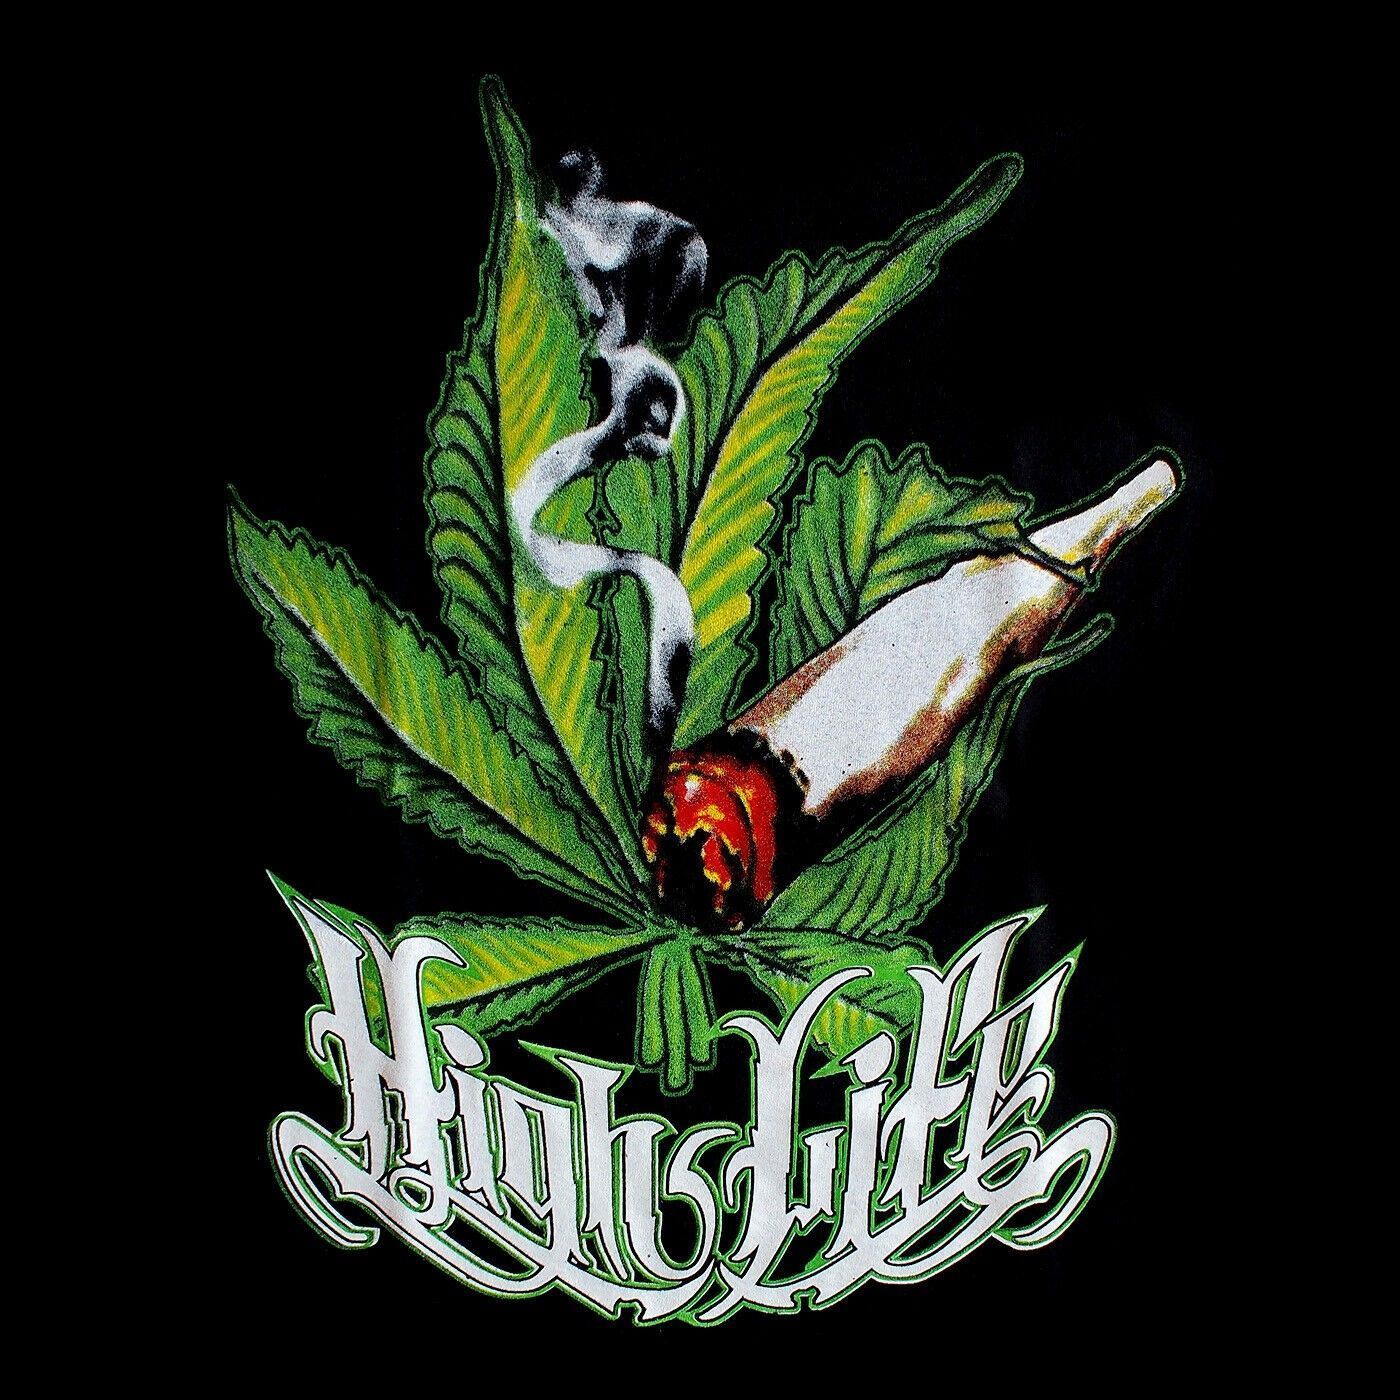 The logo for high life, a brand of marijuana - Weed